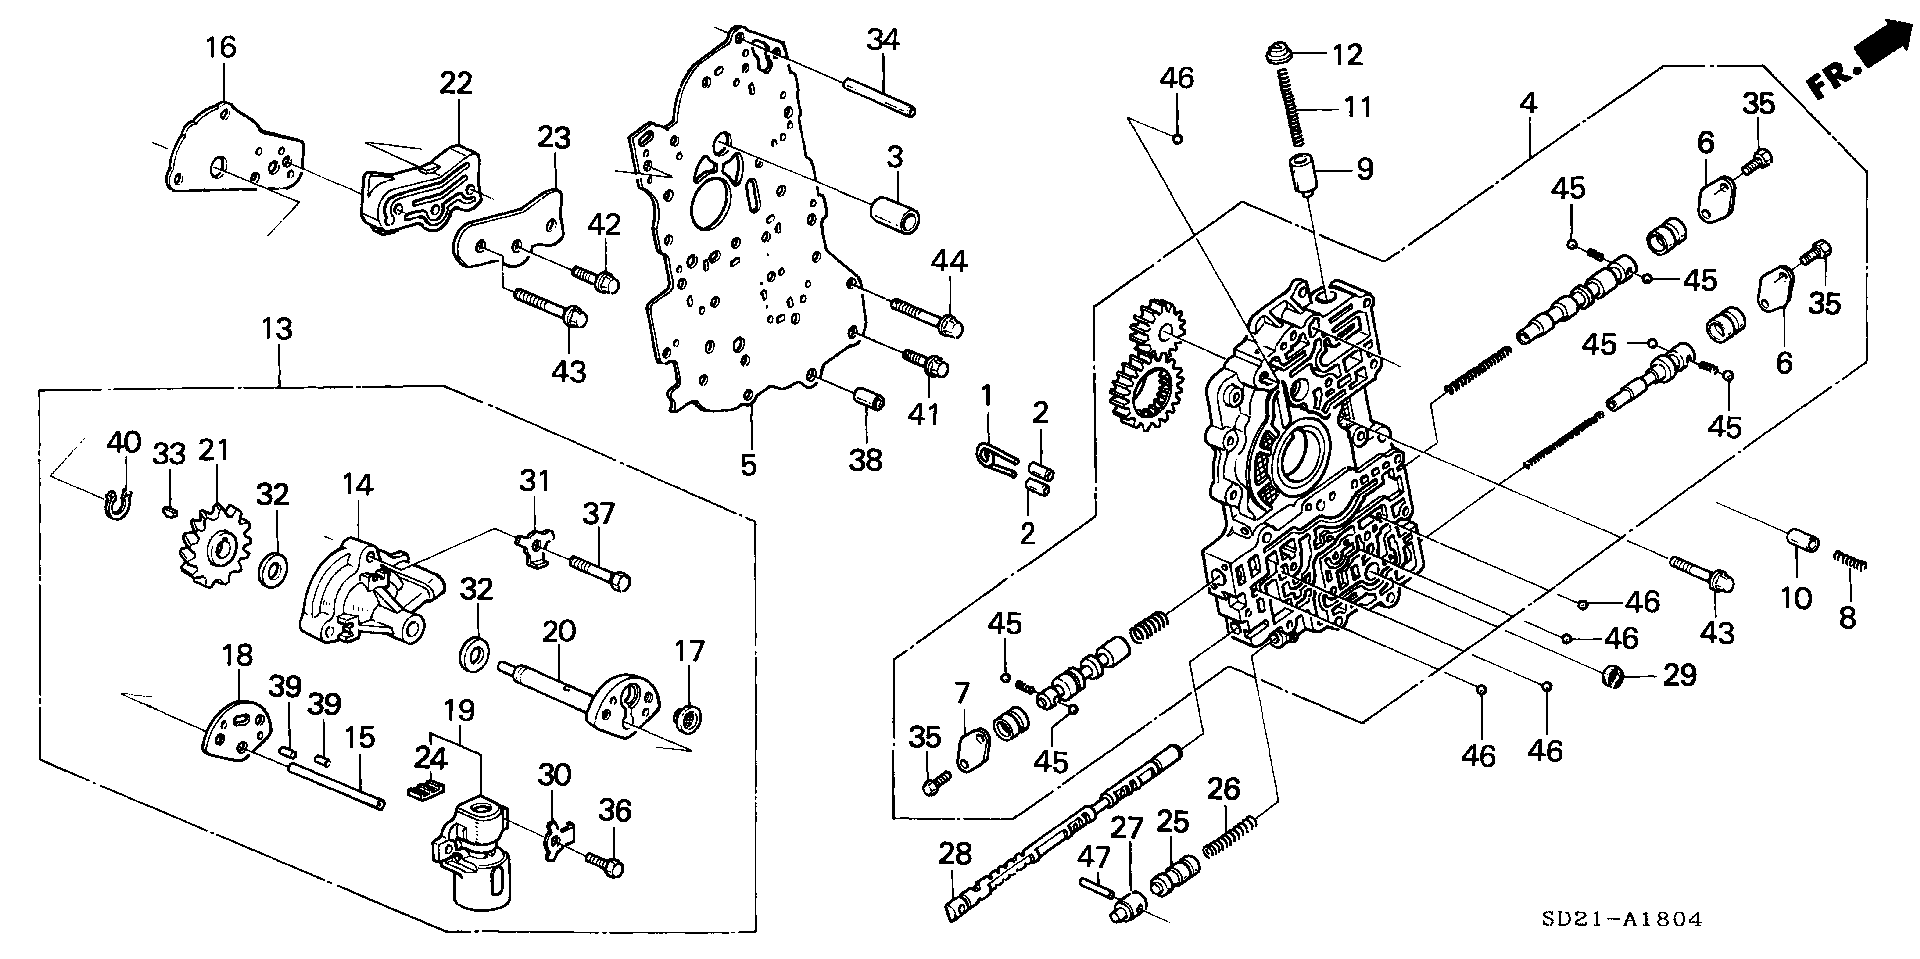 MAIN VALVE(BULB) BODY/ GOVERNOR(4AT) (P1000001-)